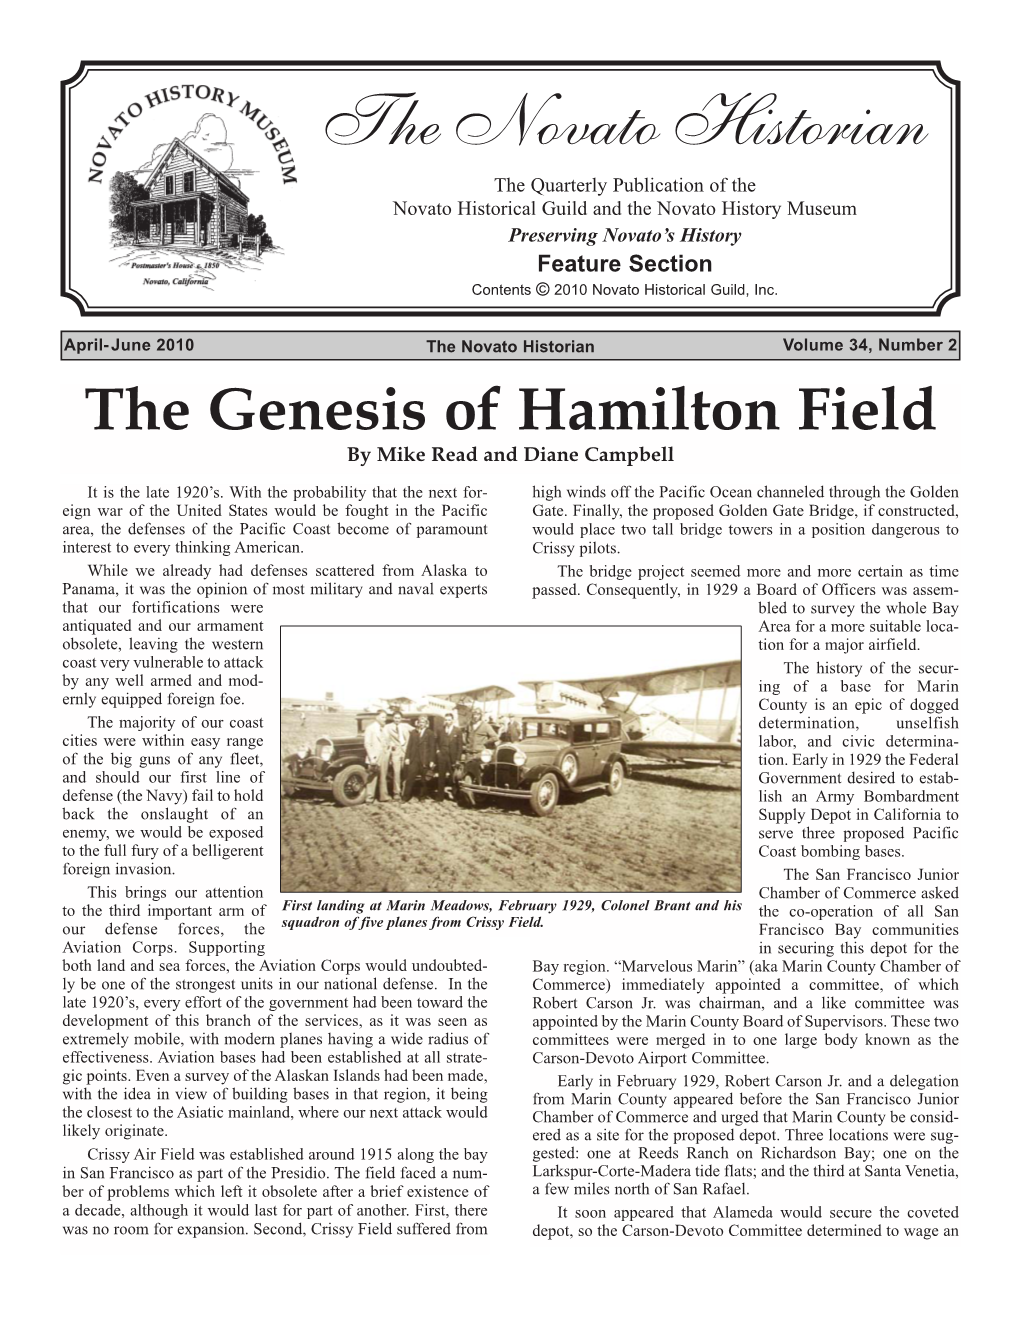 Genesis of Hamilton Field by Mike Read and Diane Campbell